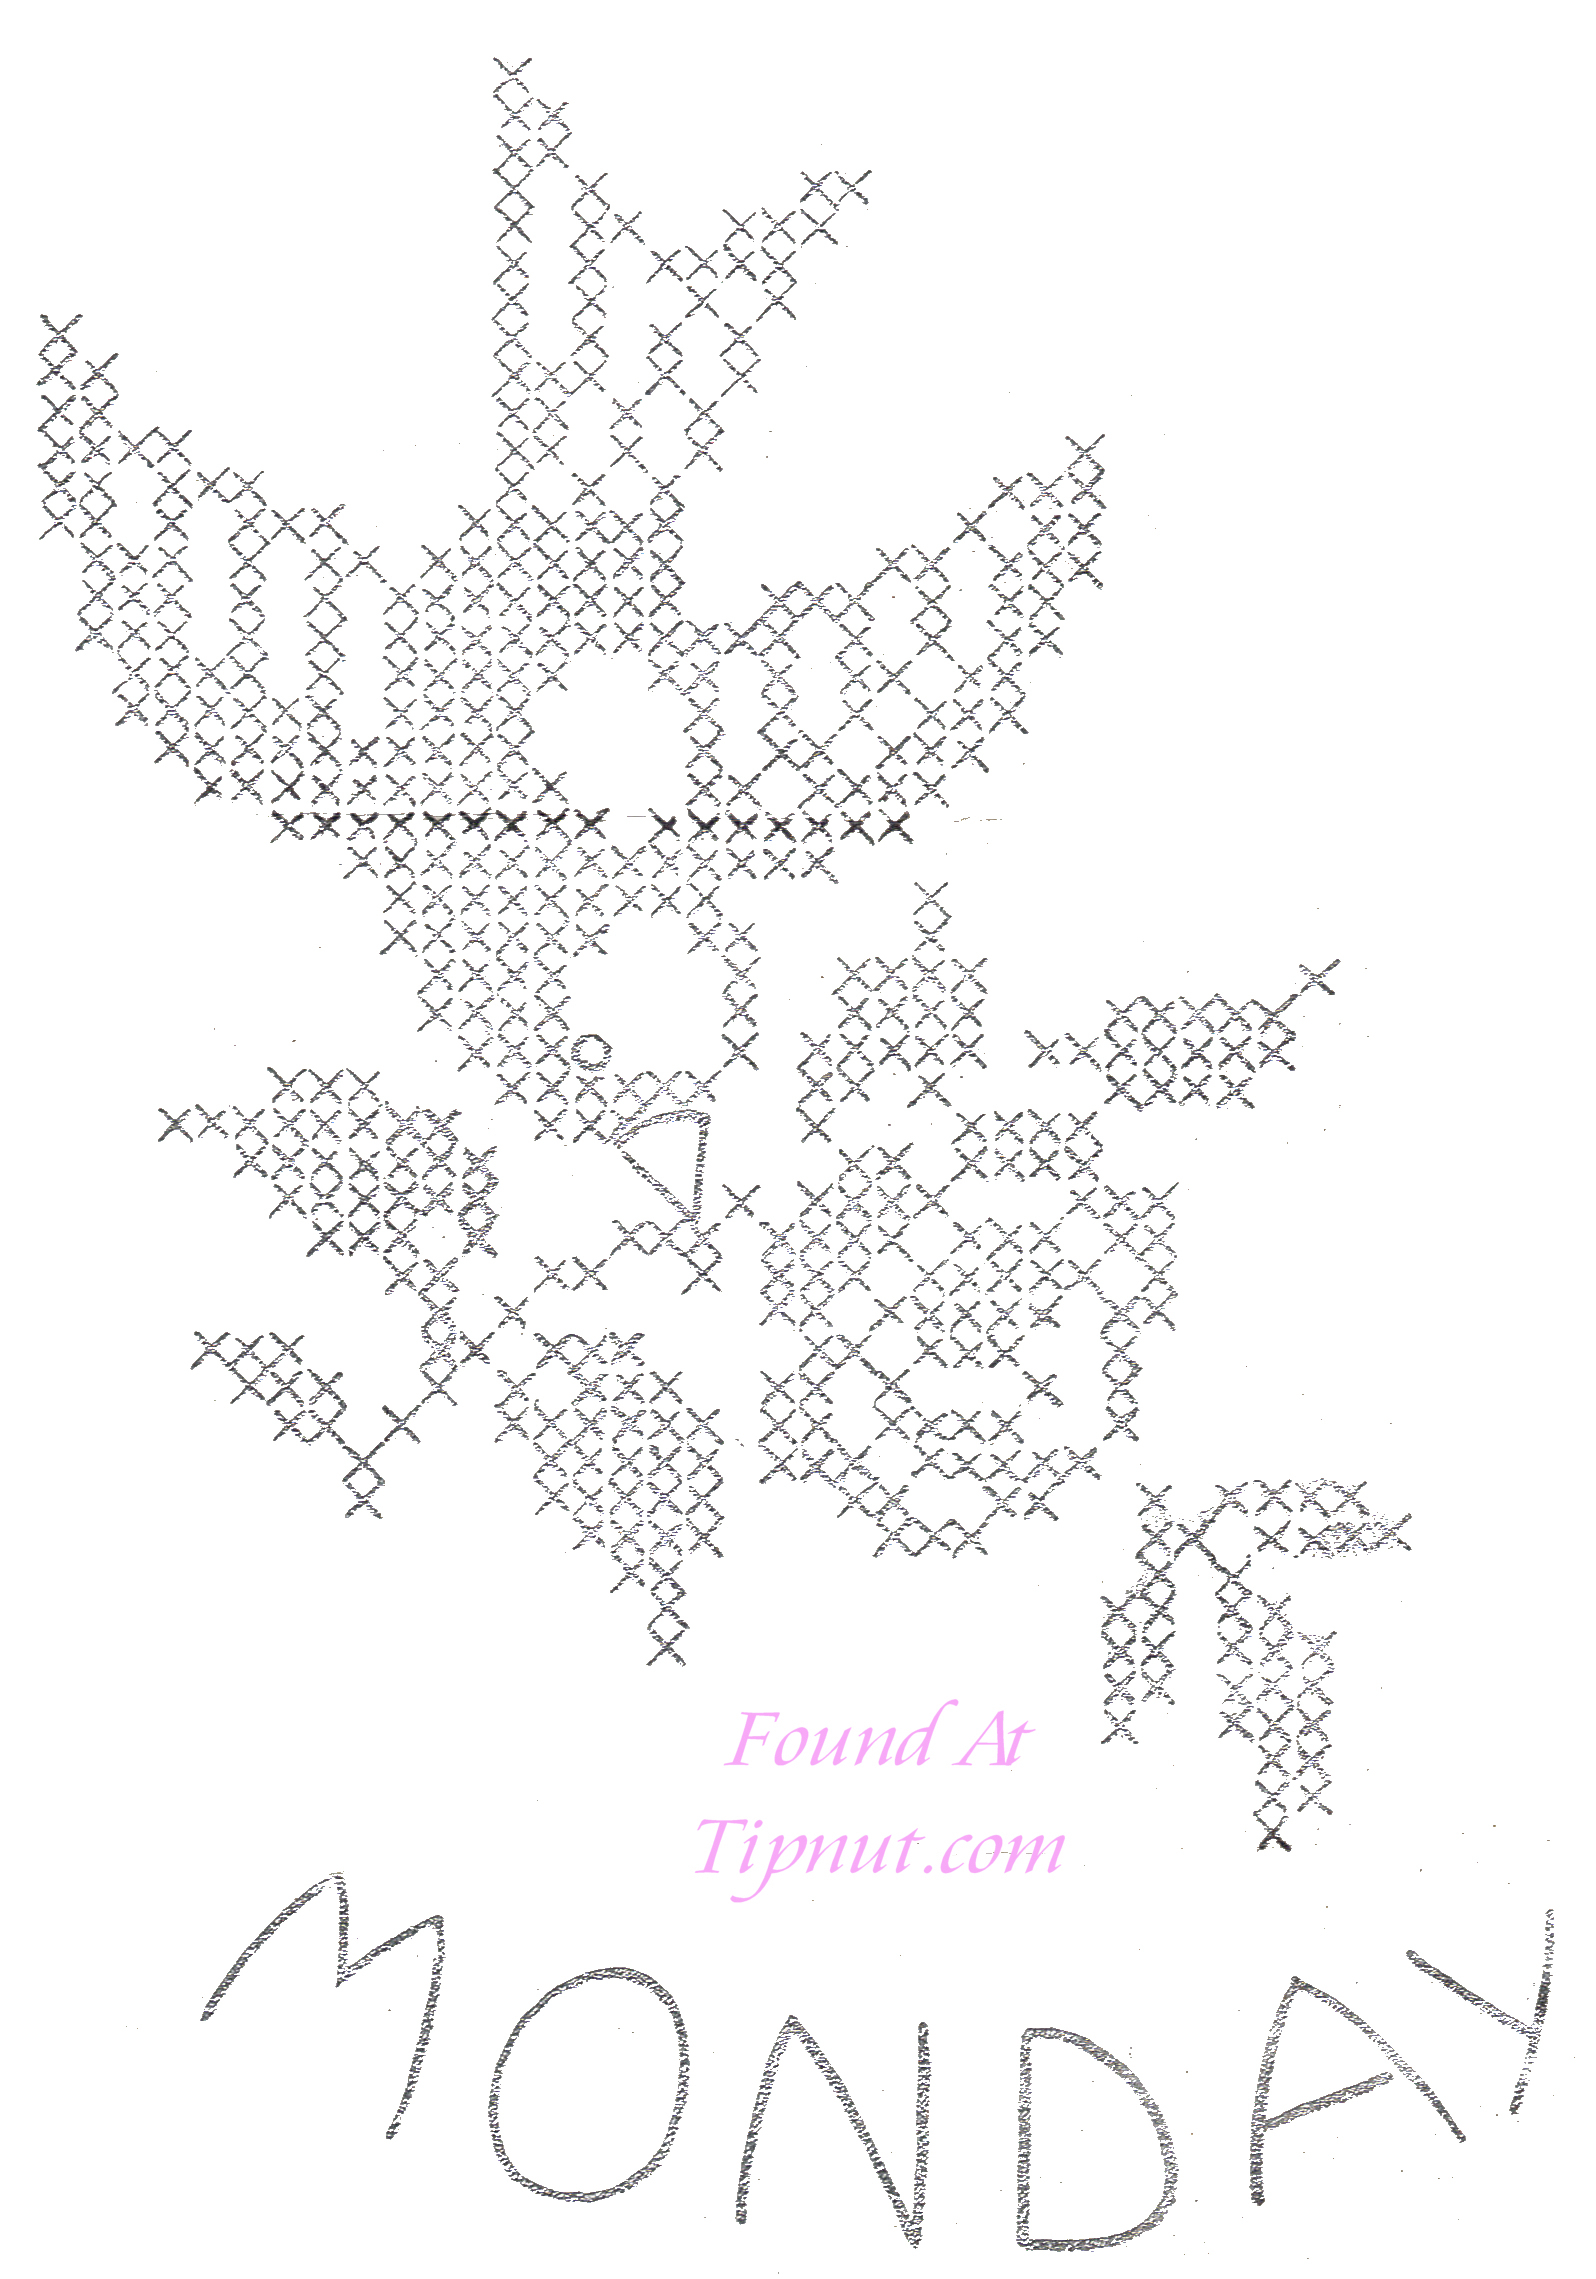 Free Vintage Embroidery Patterns Download Vintage Bluebird Cross Stitch Embroidery Patterns Tipnut